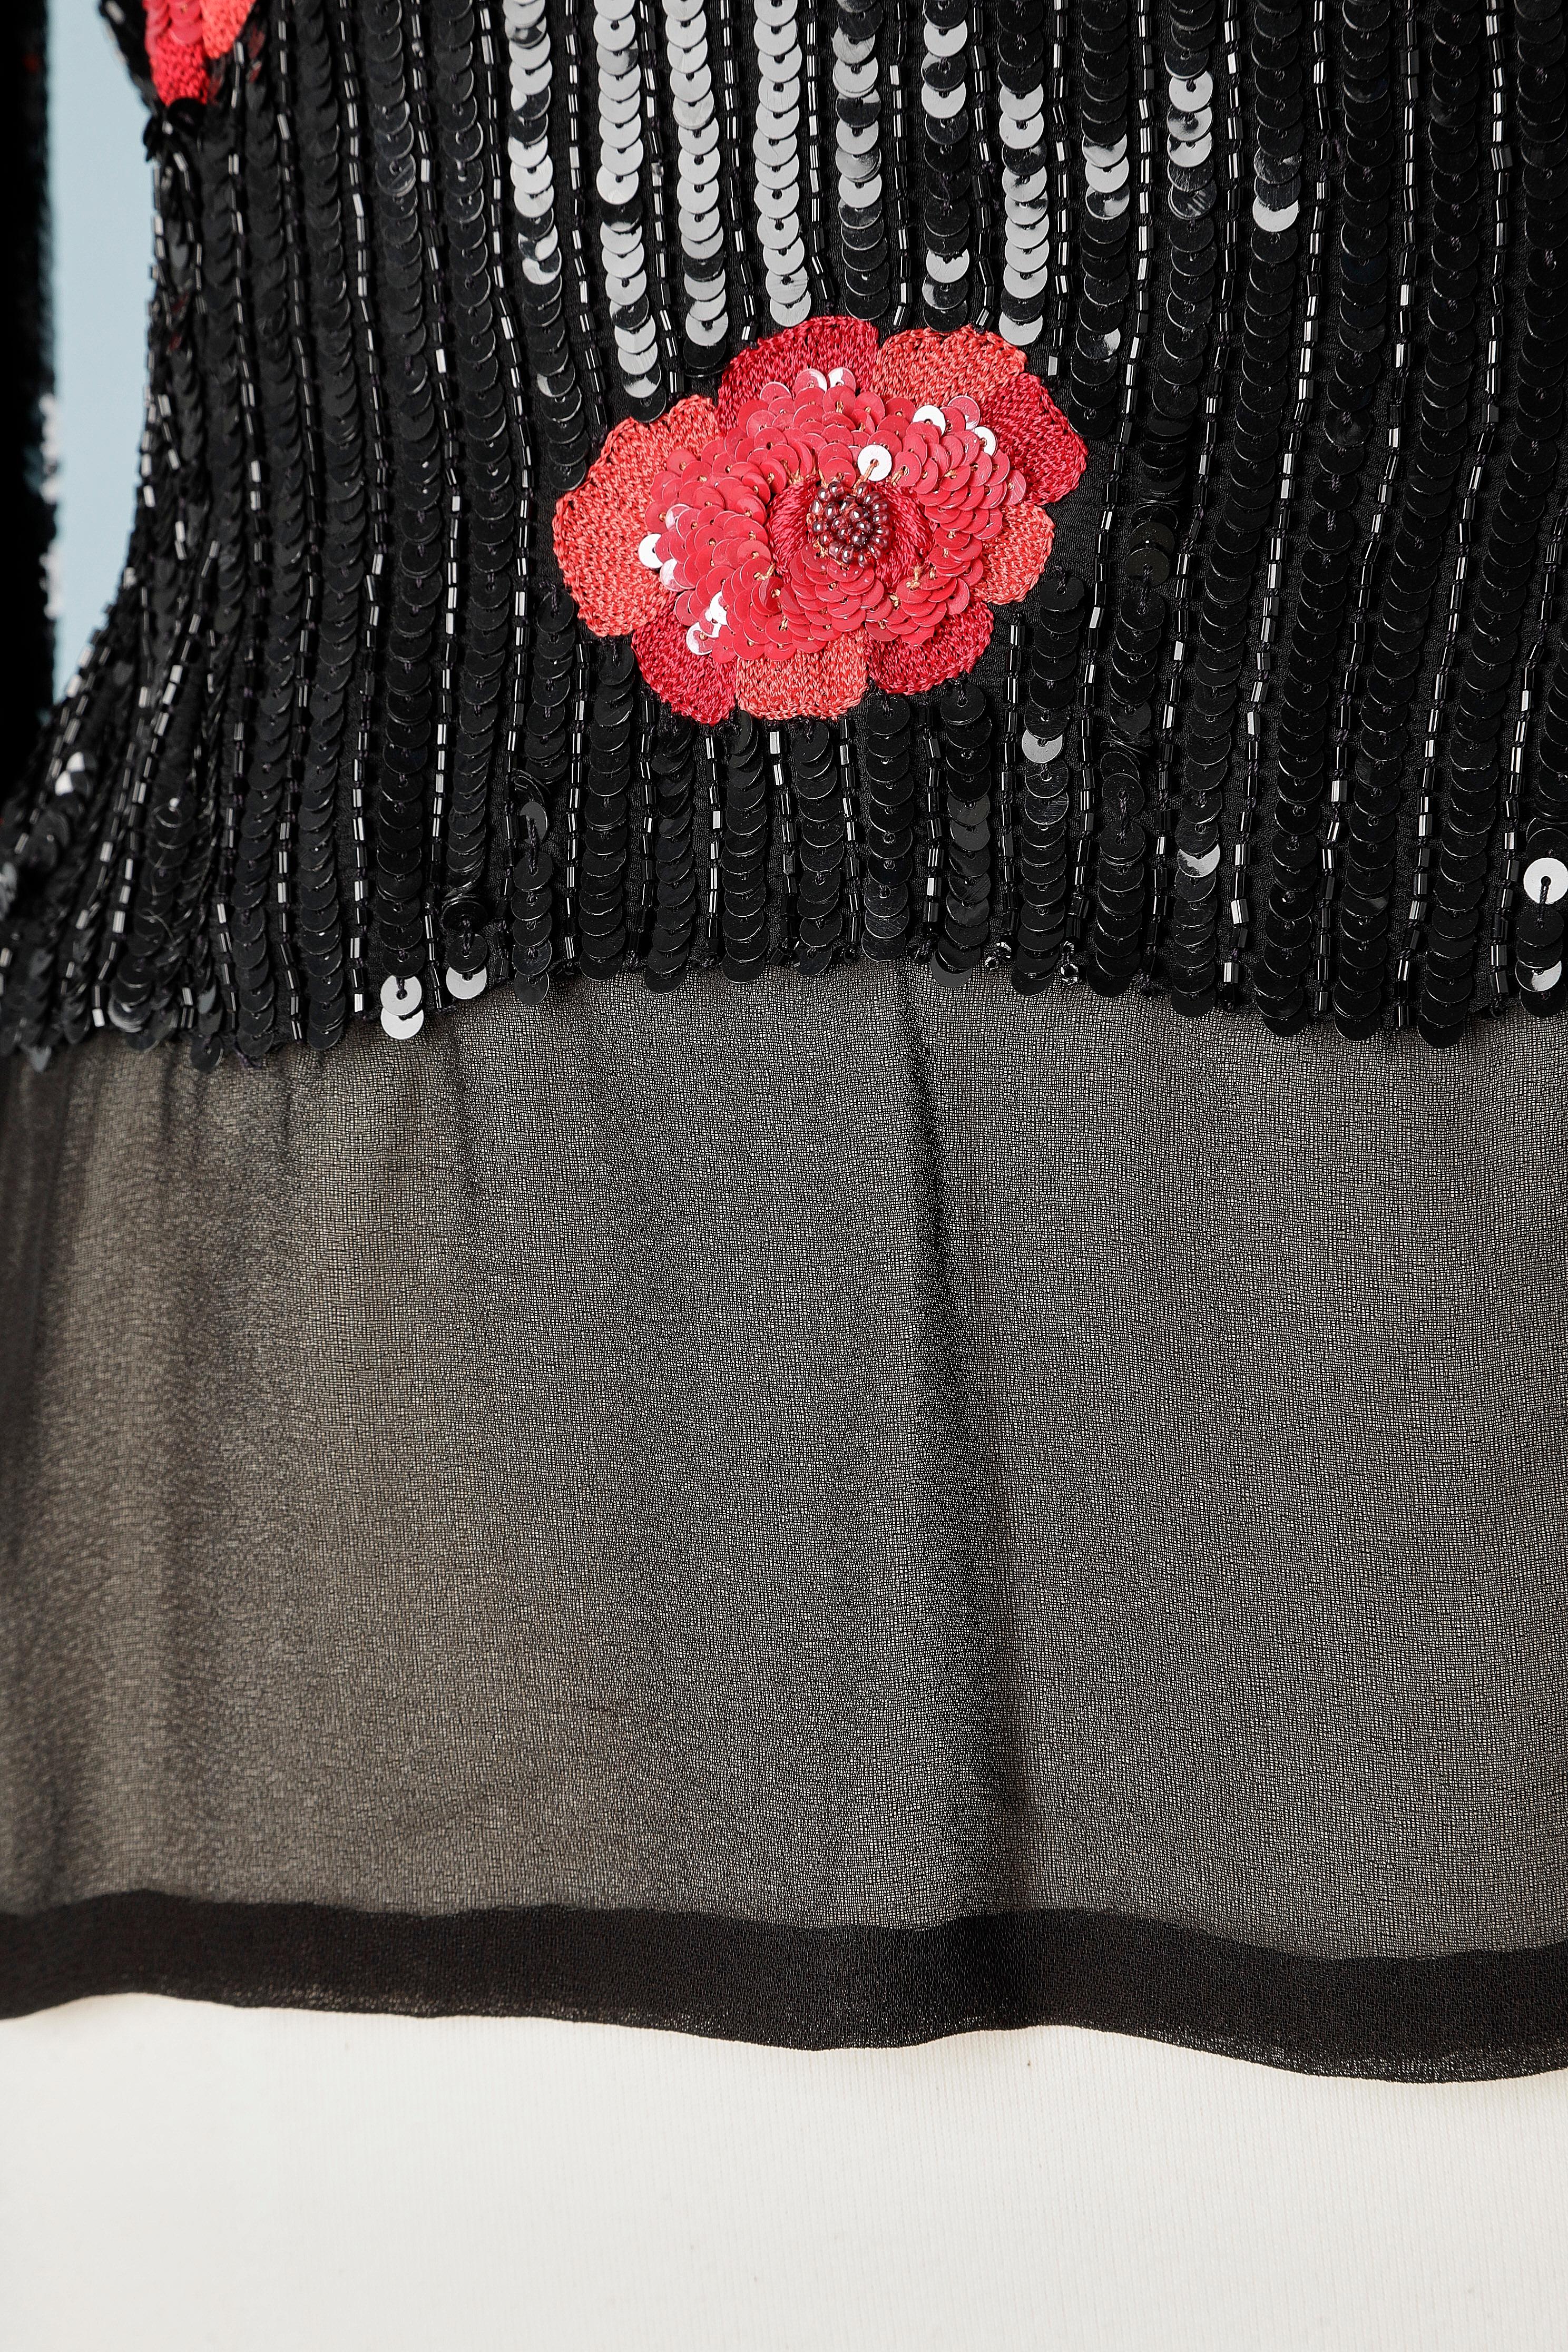 Evening top in black sequins and red flowers embroidered André Laug In Excellent Condition For Sale In Saint-Ouen-Sur-Seine, FR